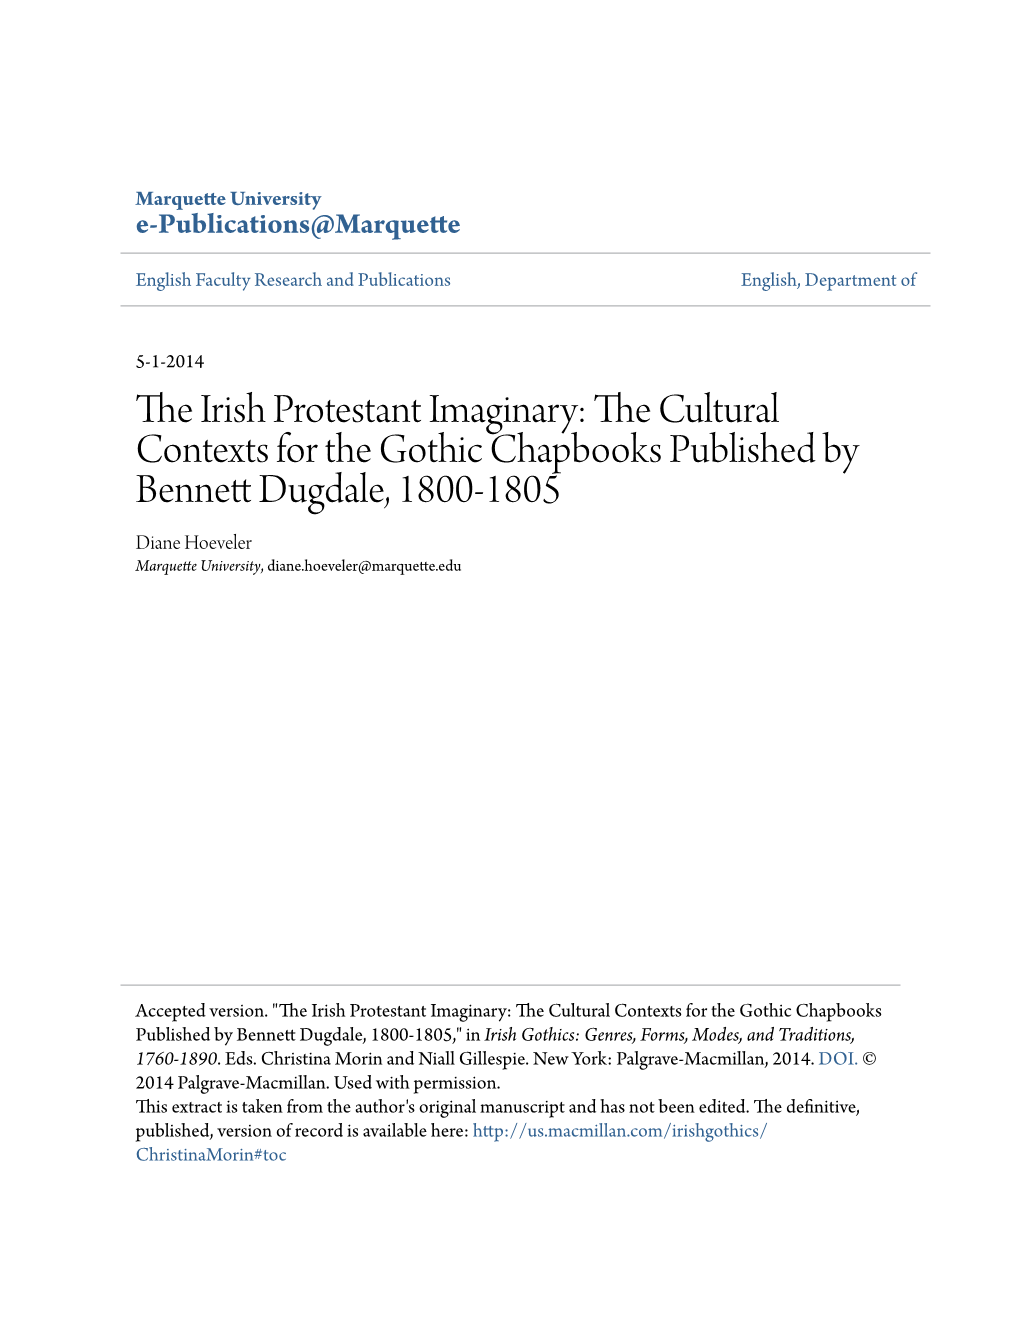 The Irish Protestant Imaginary: the Cultural Contexts for the Gothic Chapbooks